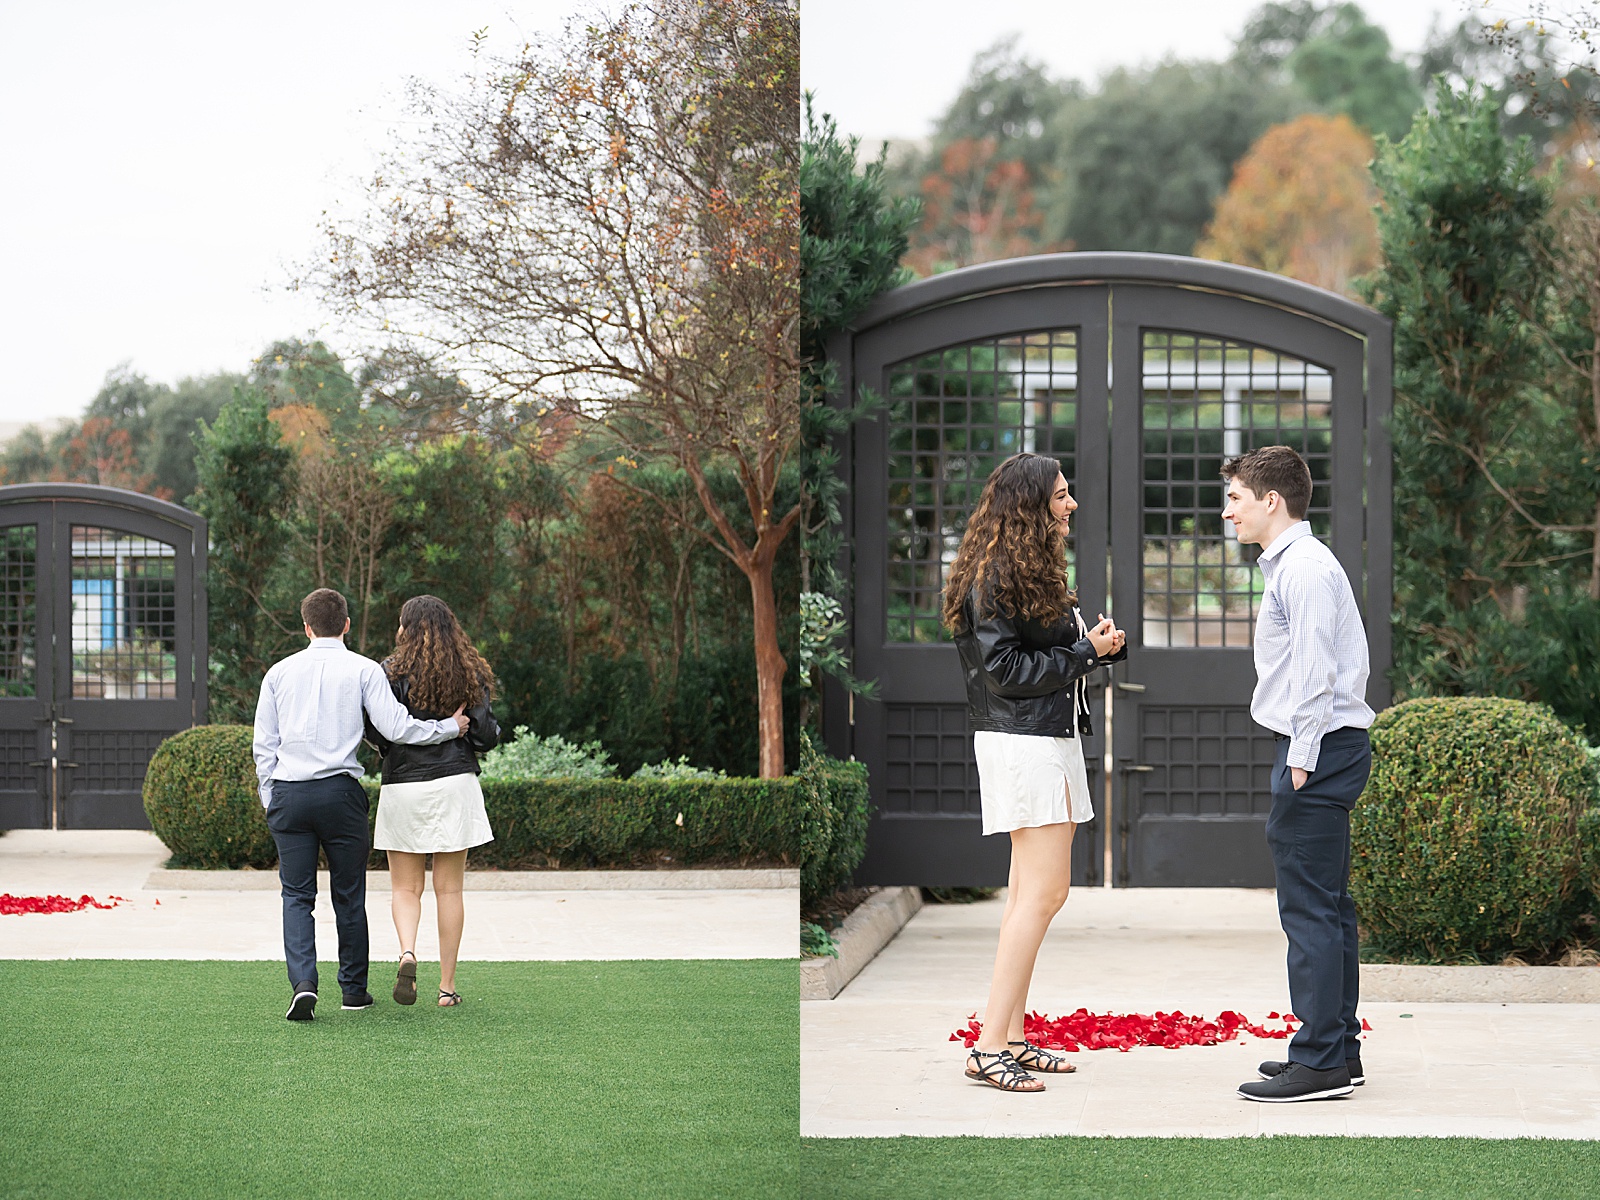 Man and woman walk together to proposal site by Swish & Click Photography